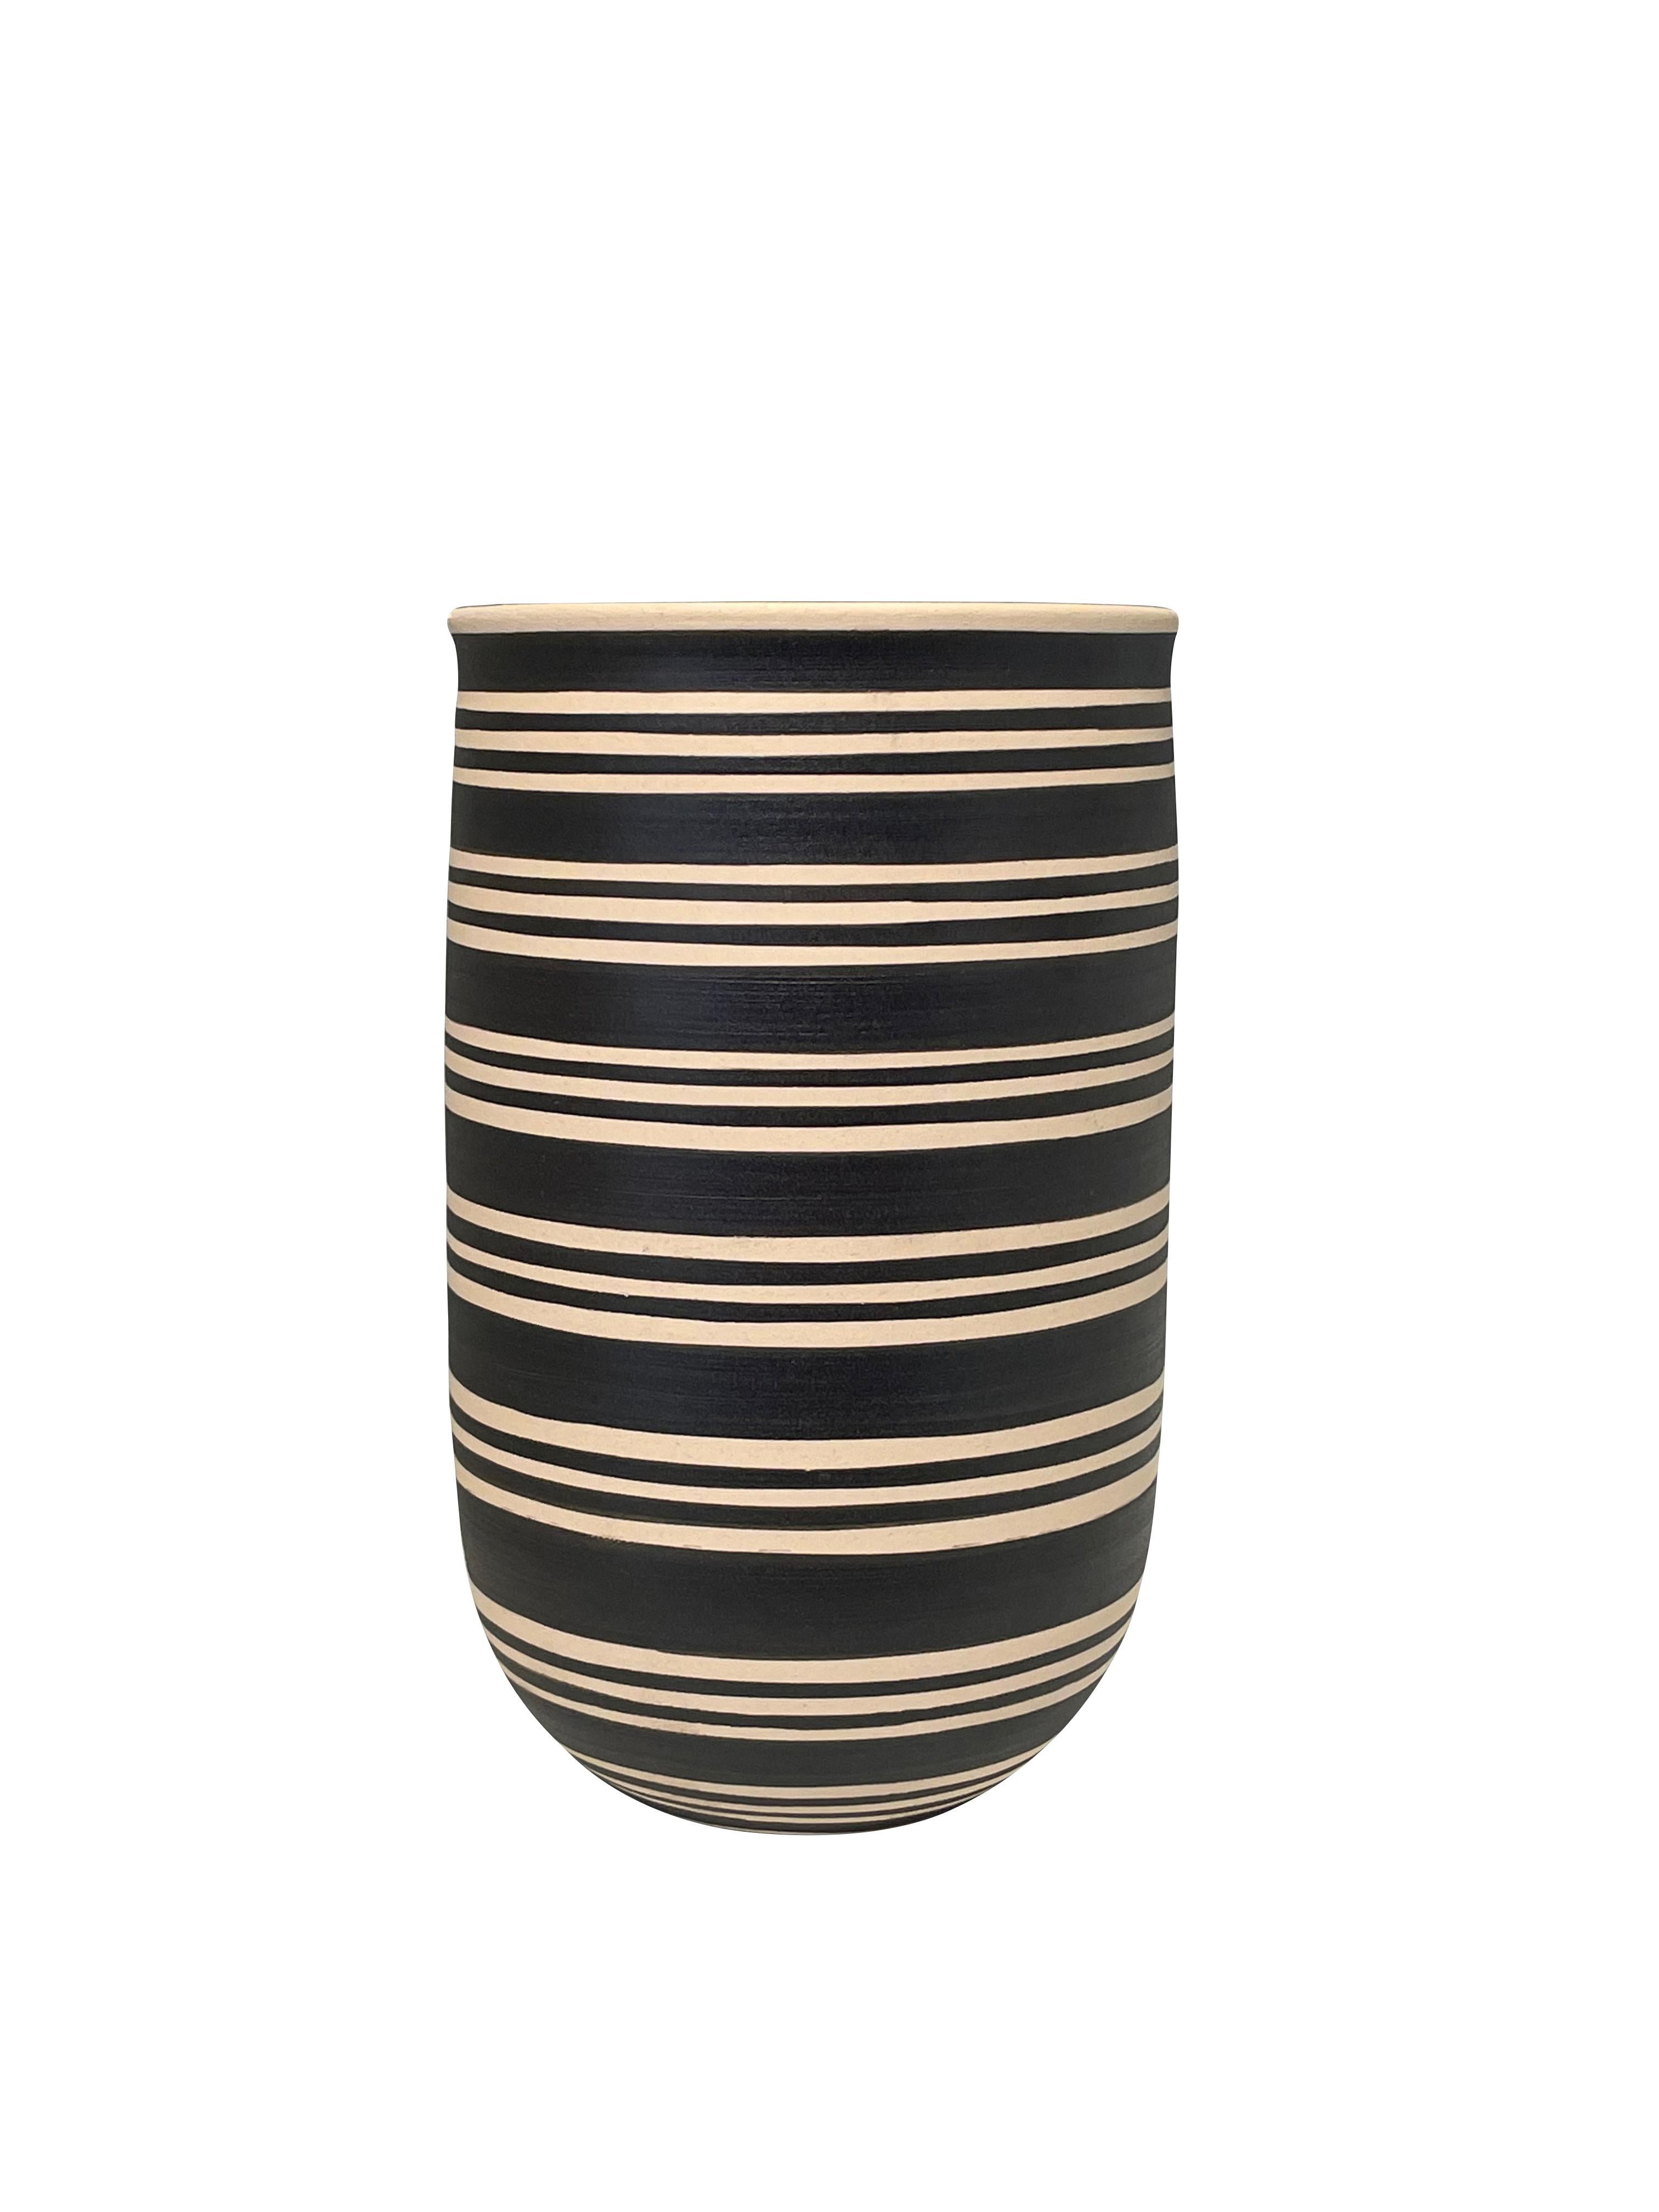 Contemporary Turkish handmade black and cream triple band stripes.
Wide opening.
Can hold water.
Two available and sold individually.
From a large collection.